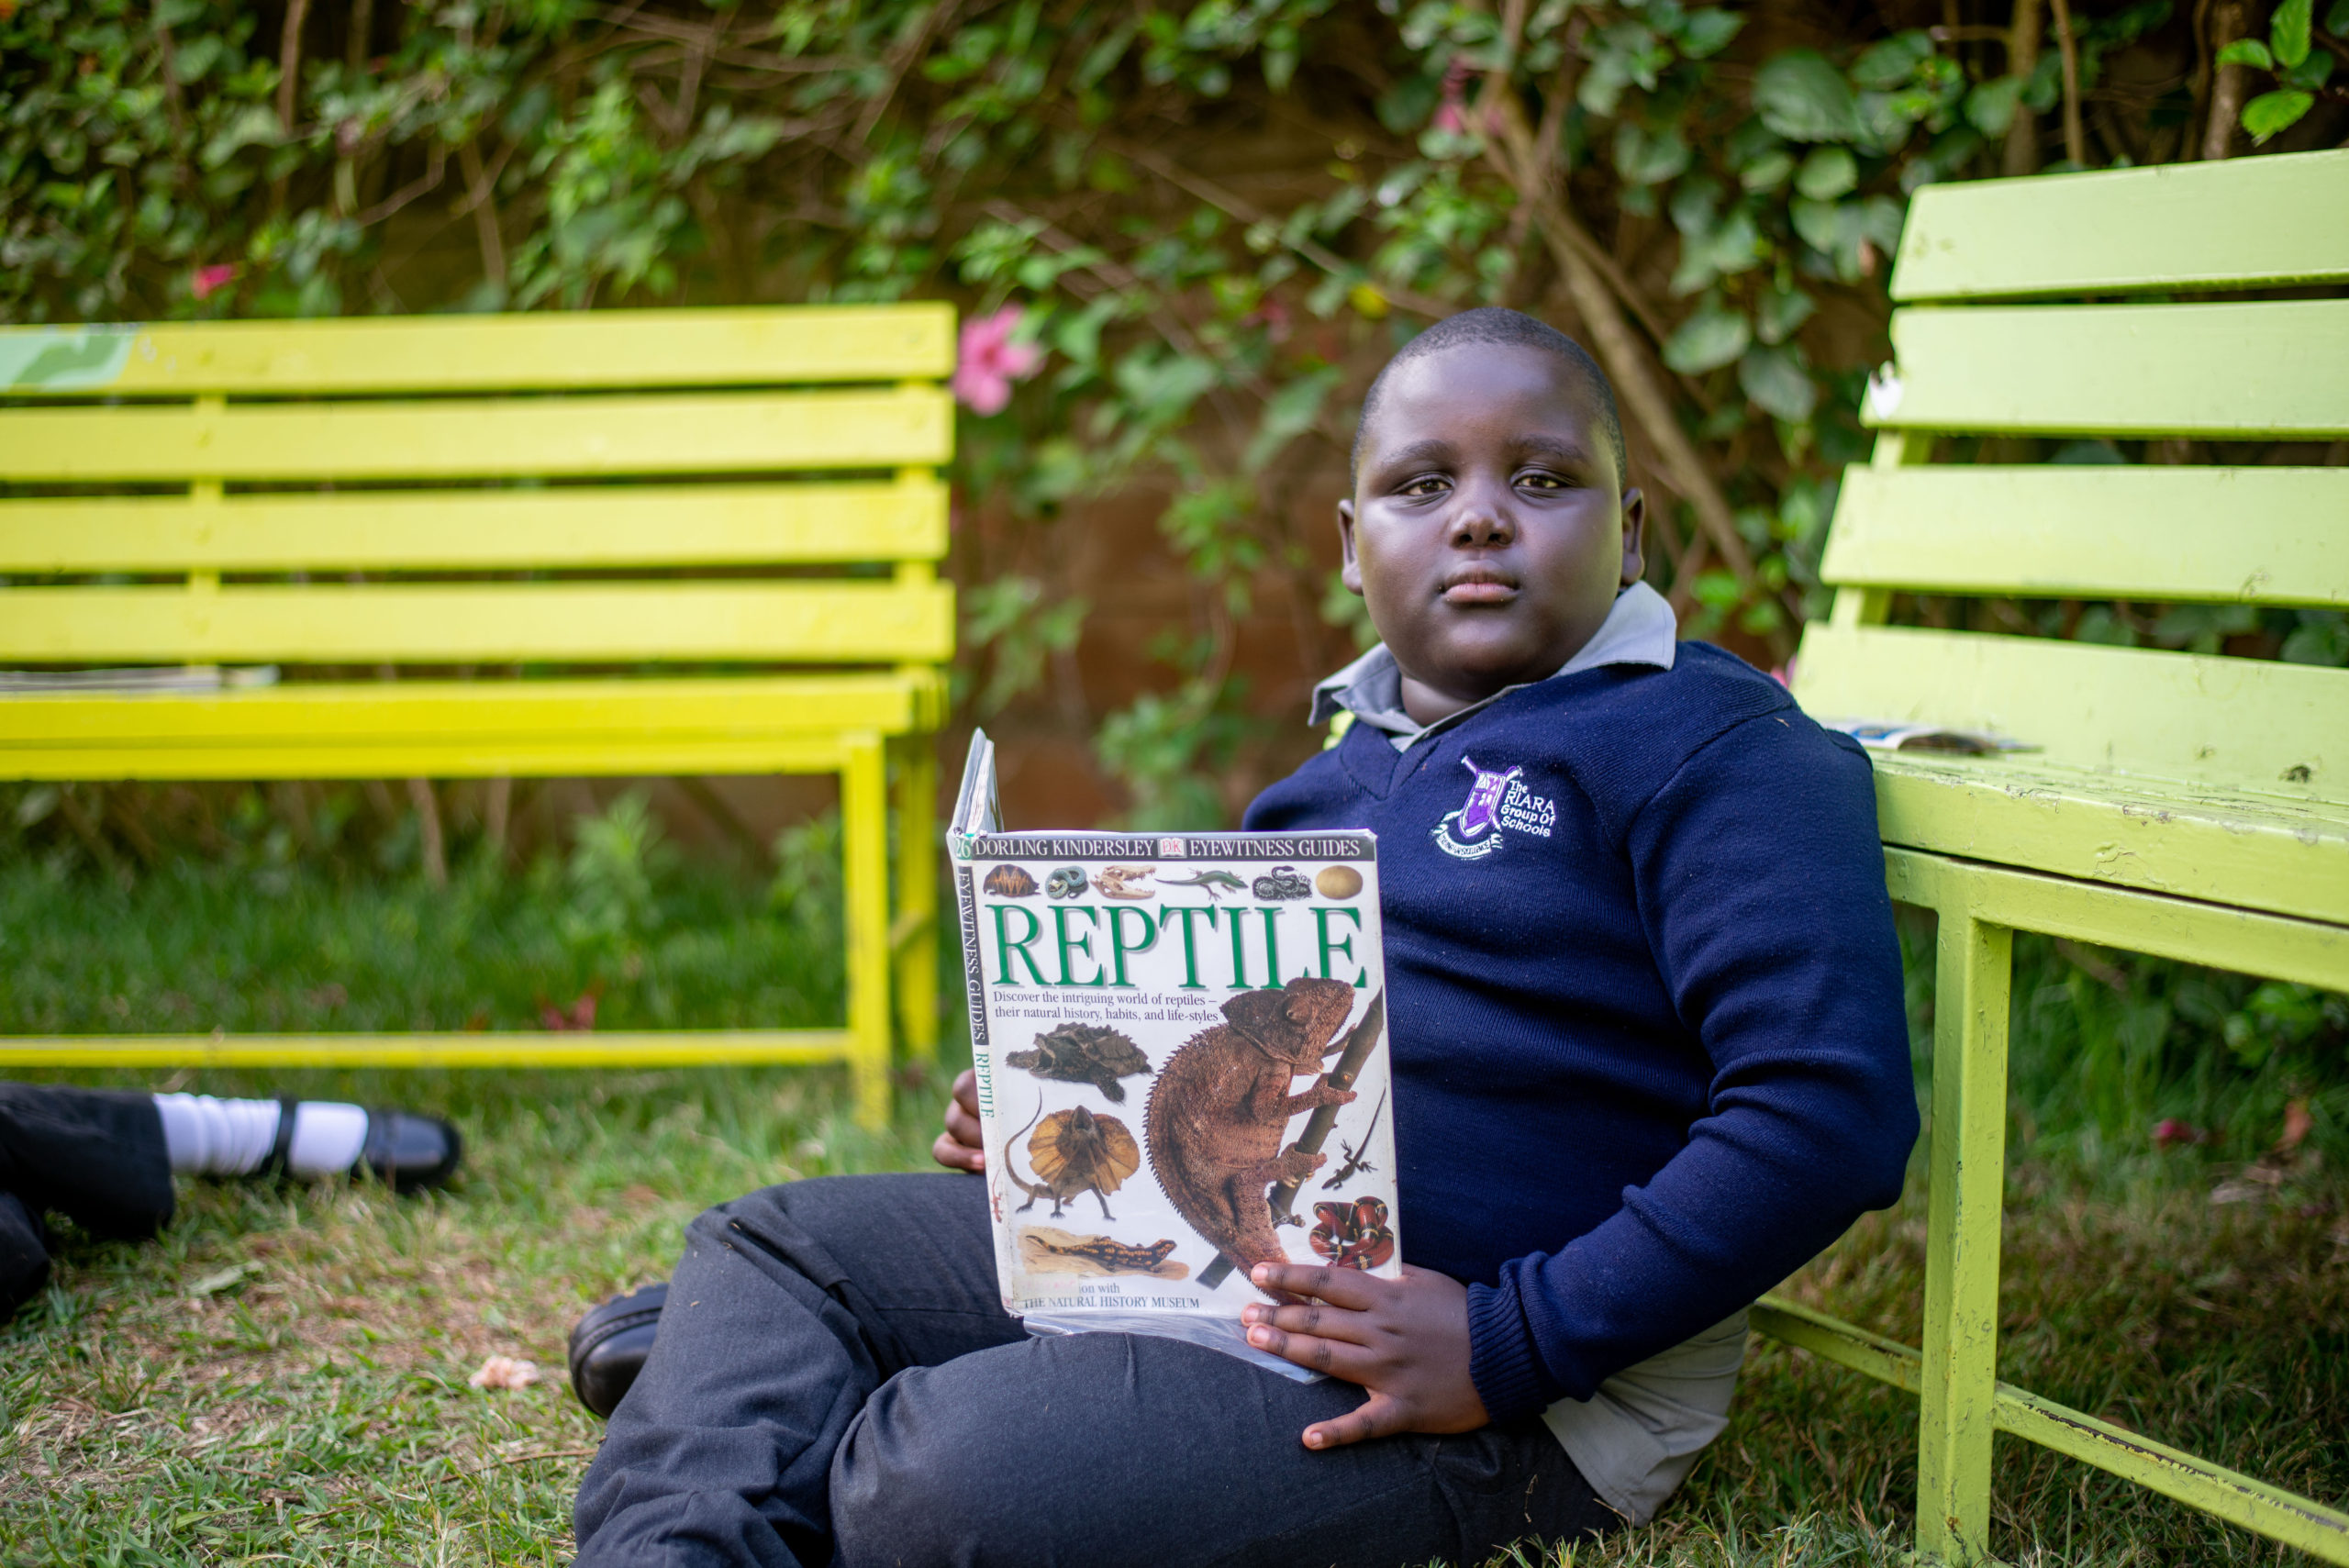 Riara springs primary school pupil reading Reptile book outdoors